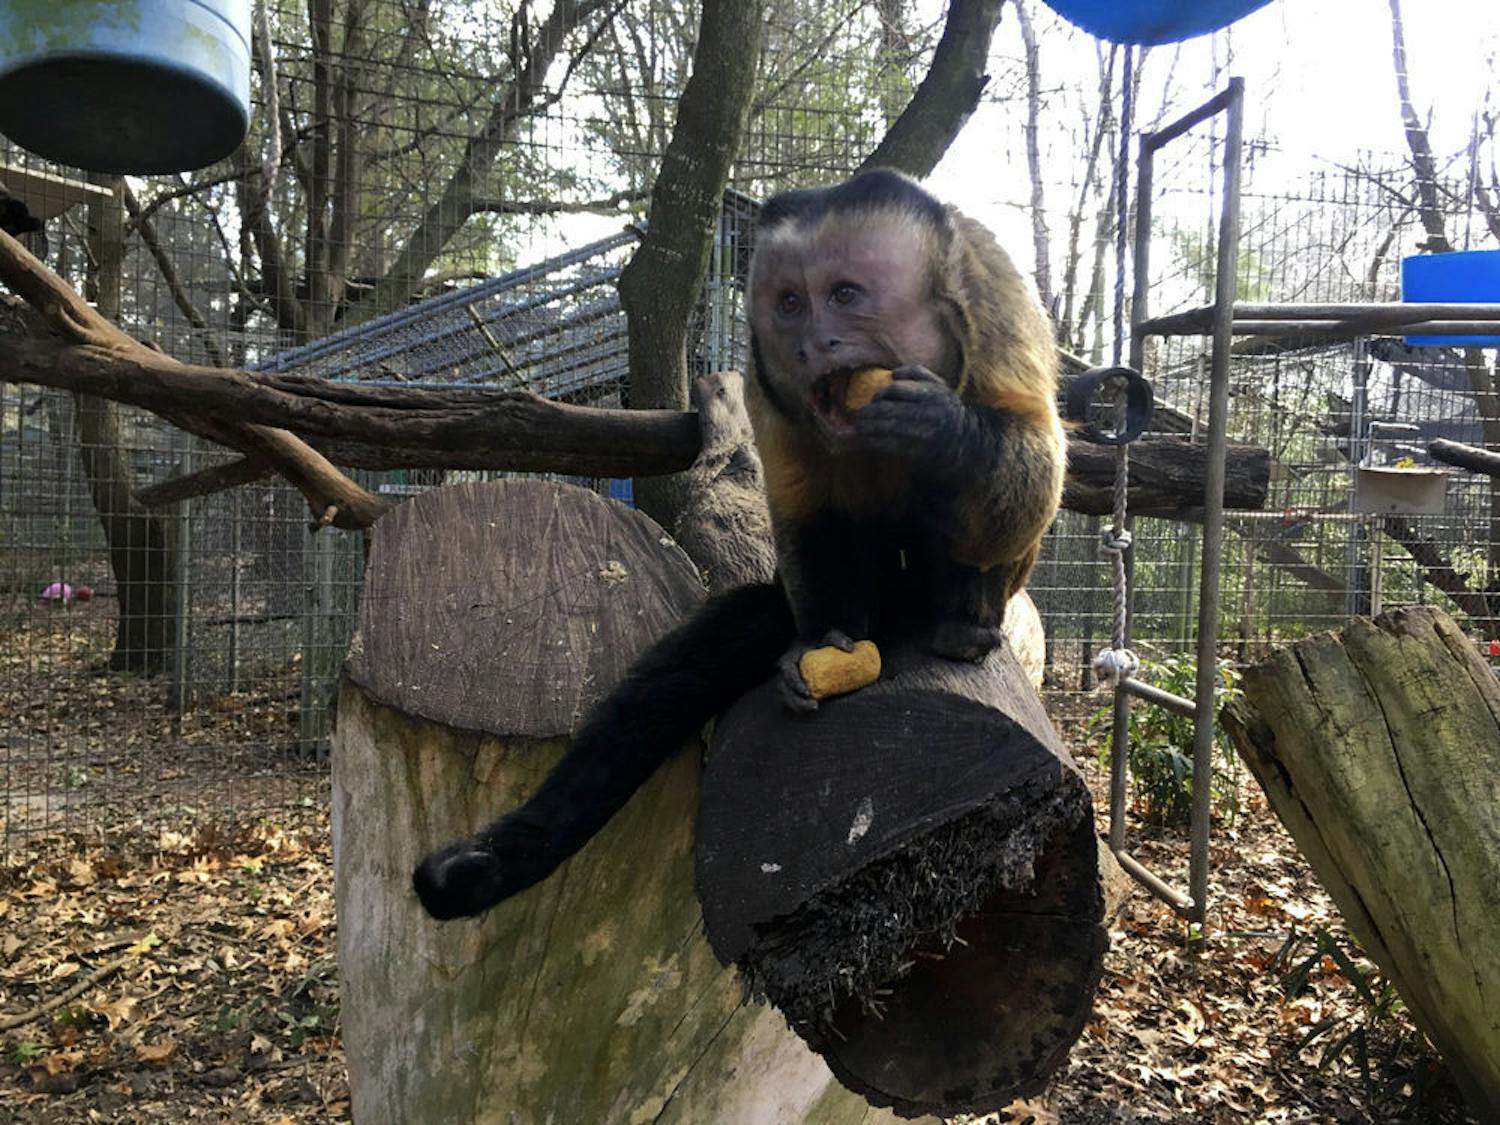 Jersey, an 11-year-old Brown Capuchins monkey, enjoys a snack Tuesday afternoon at the Jungle Friends Primate Sanctuary. Jersey is one of the 25 monkies at the sanctuary.